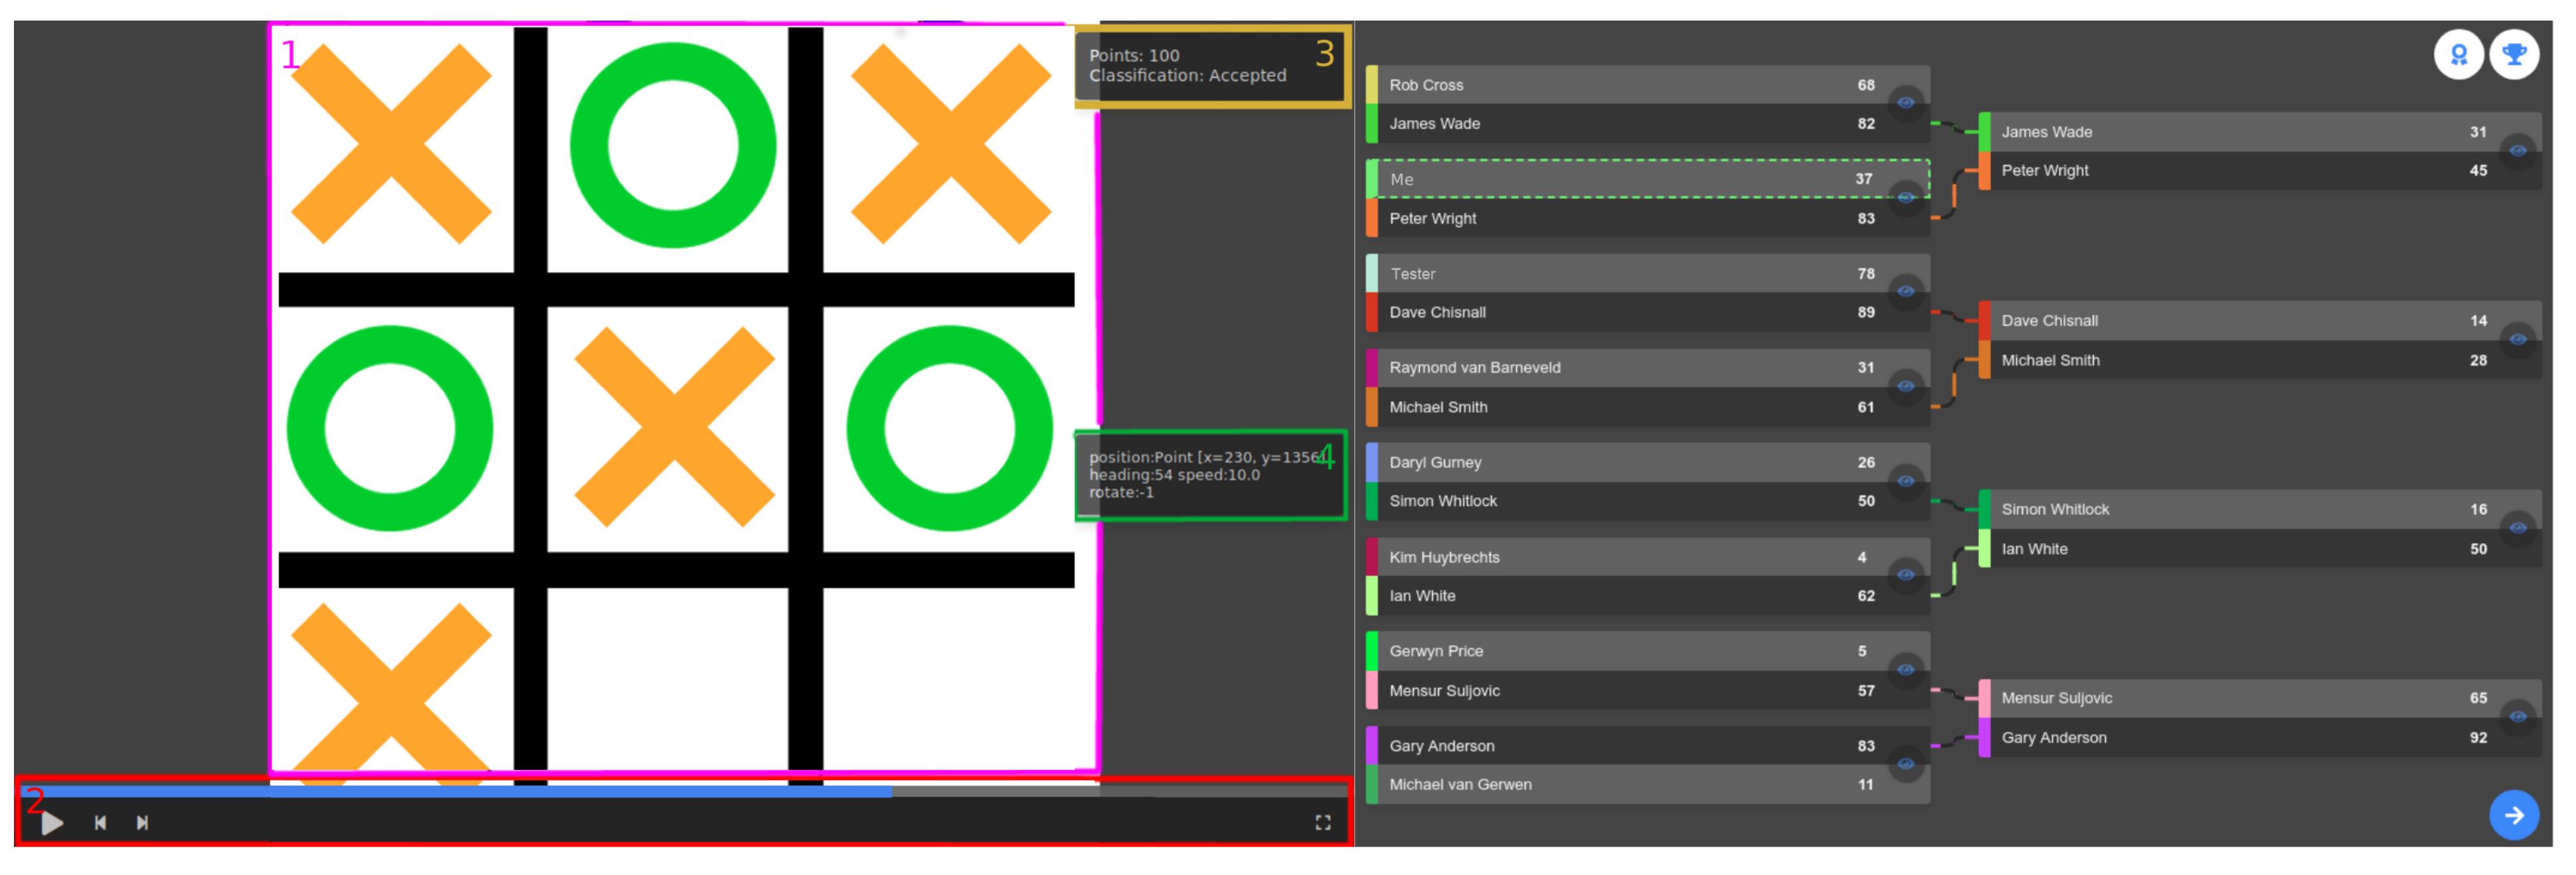 Square Tic Tac Toe GUI - Practice Python Projects